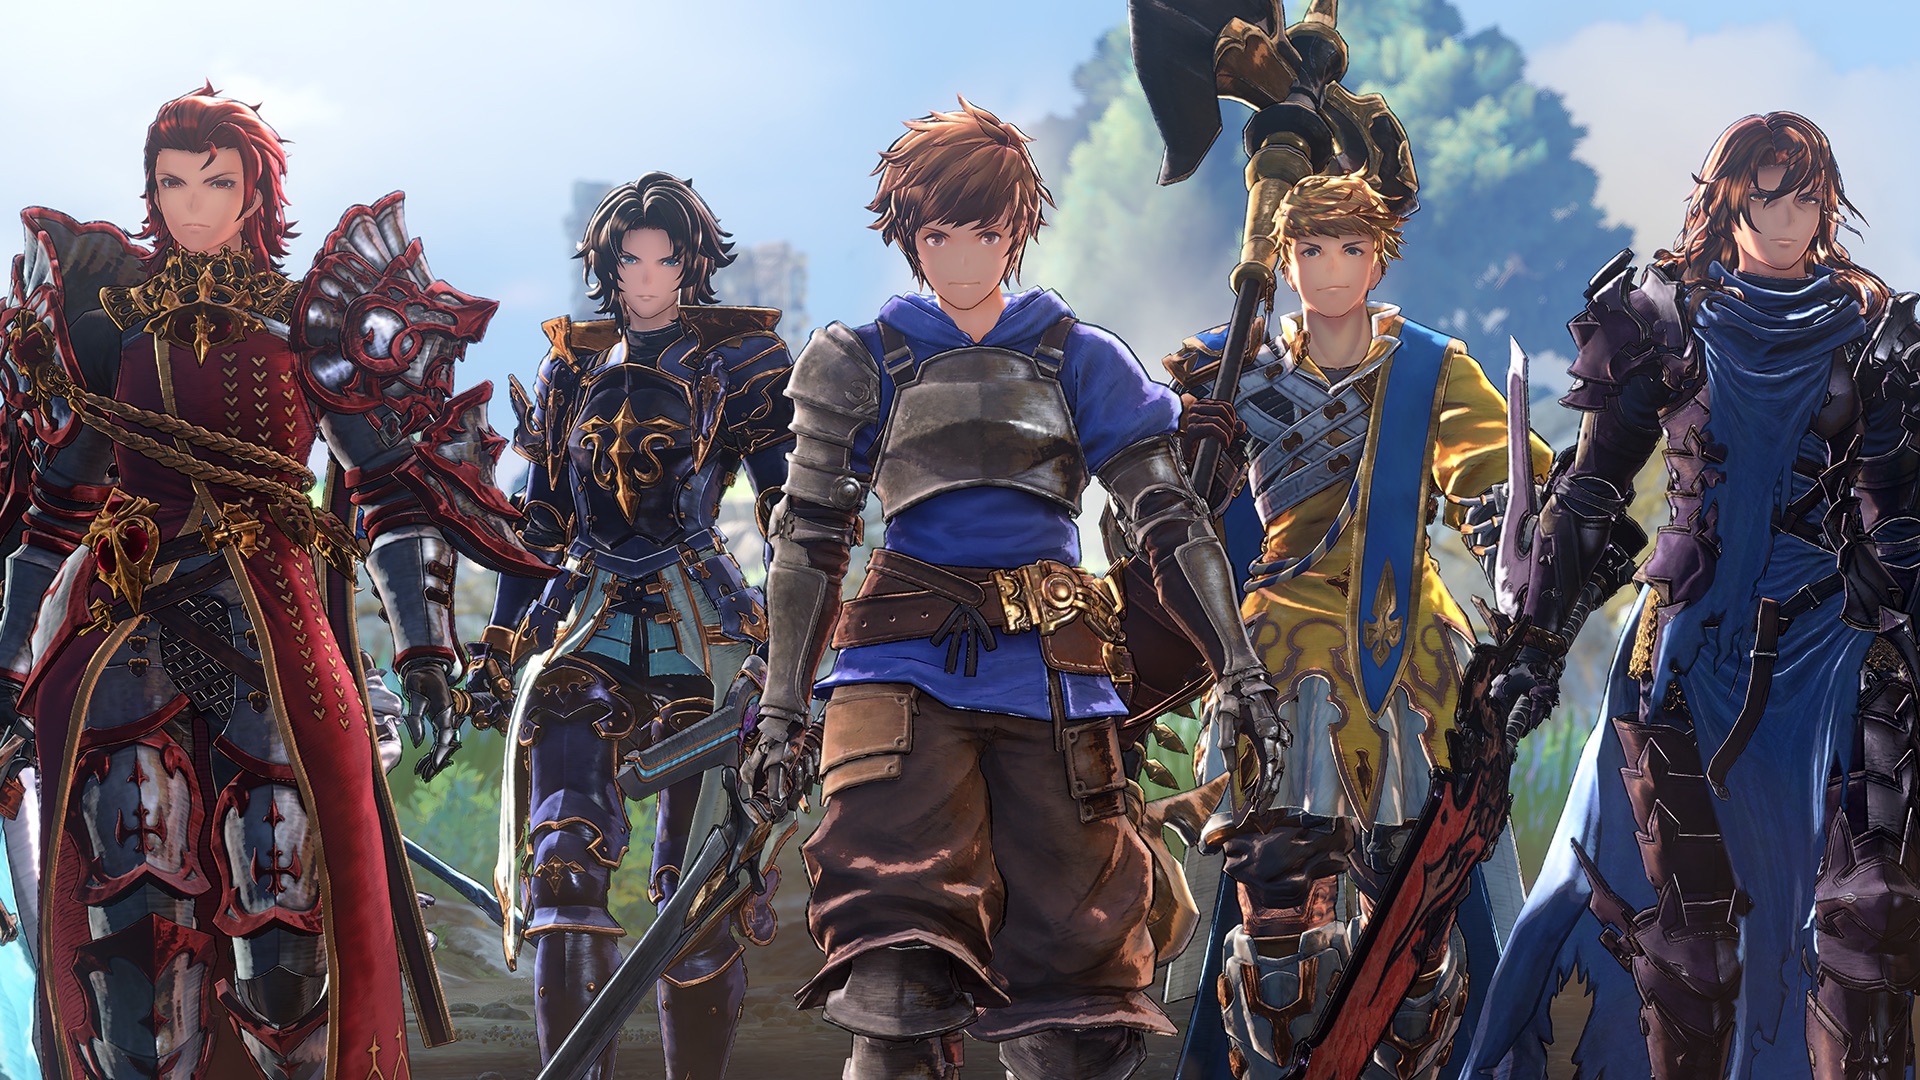 Granblue Fantasy: Relink's action-RPG style is an exciting take on